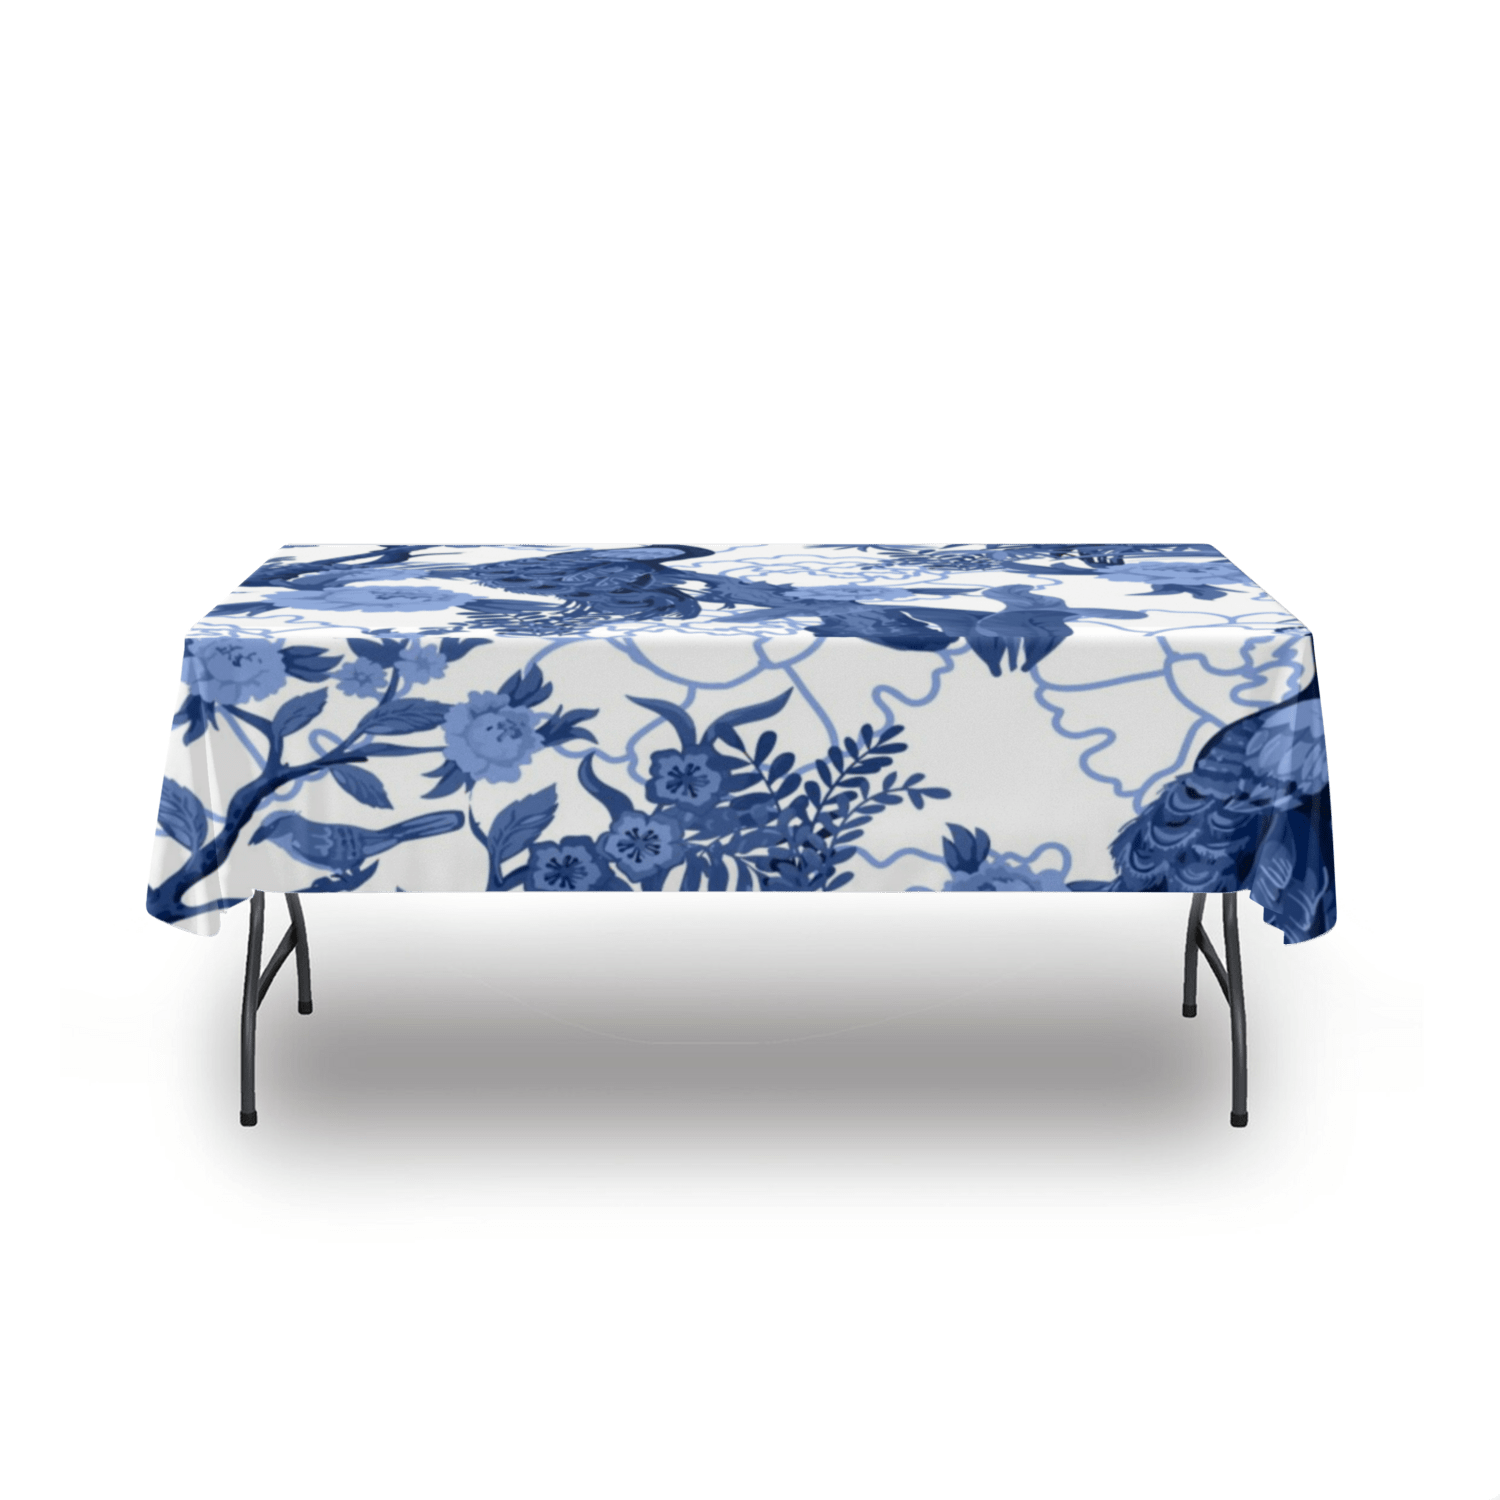 kate-mcenroe-nyc Chinoiserie Blue Peacock Tablecloth, Elegant Floral Bird Design, Classic Table Linen Tablecloths 54&quot; x 72&quot; 100224